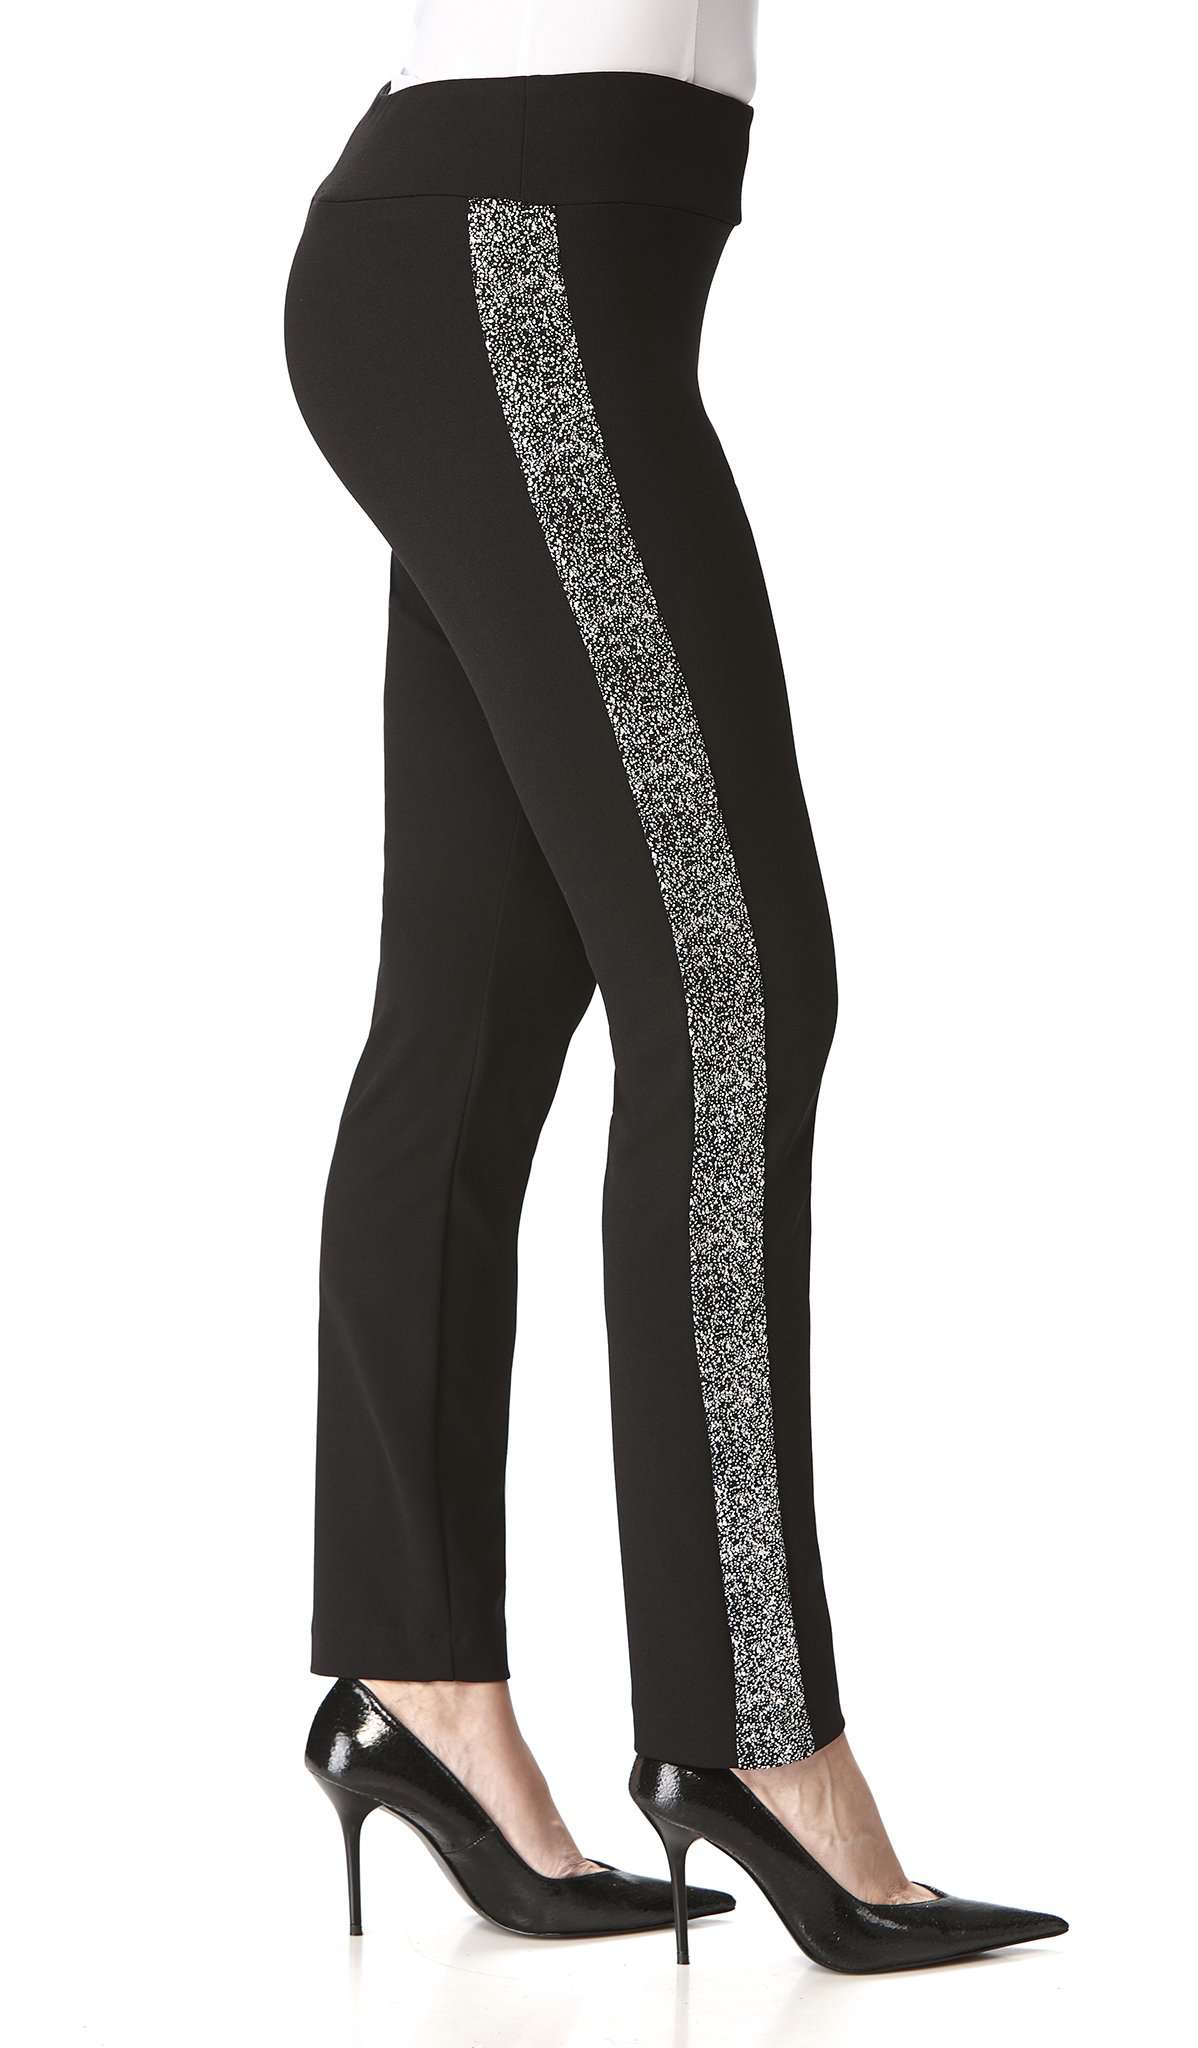 Ladies Black Pants Comfort Travel Pant Our Best Seller Magic Pant  Flattering Comfort True to Size Fit Yvonne marie Designs Made in Canada